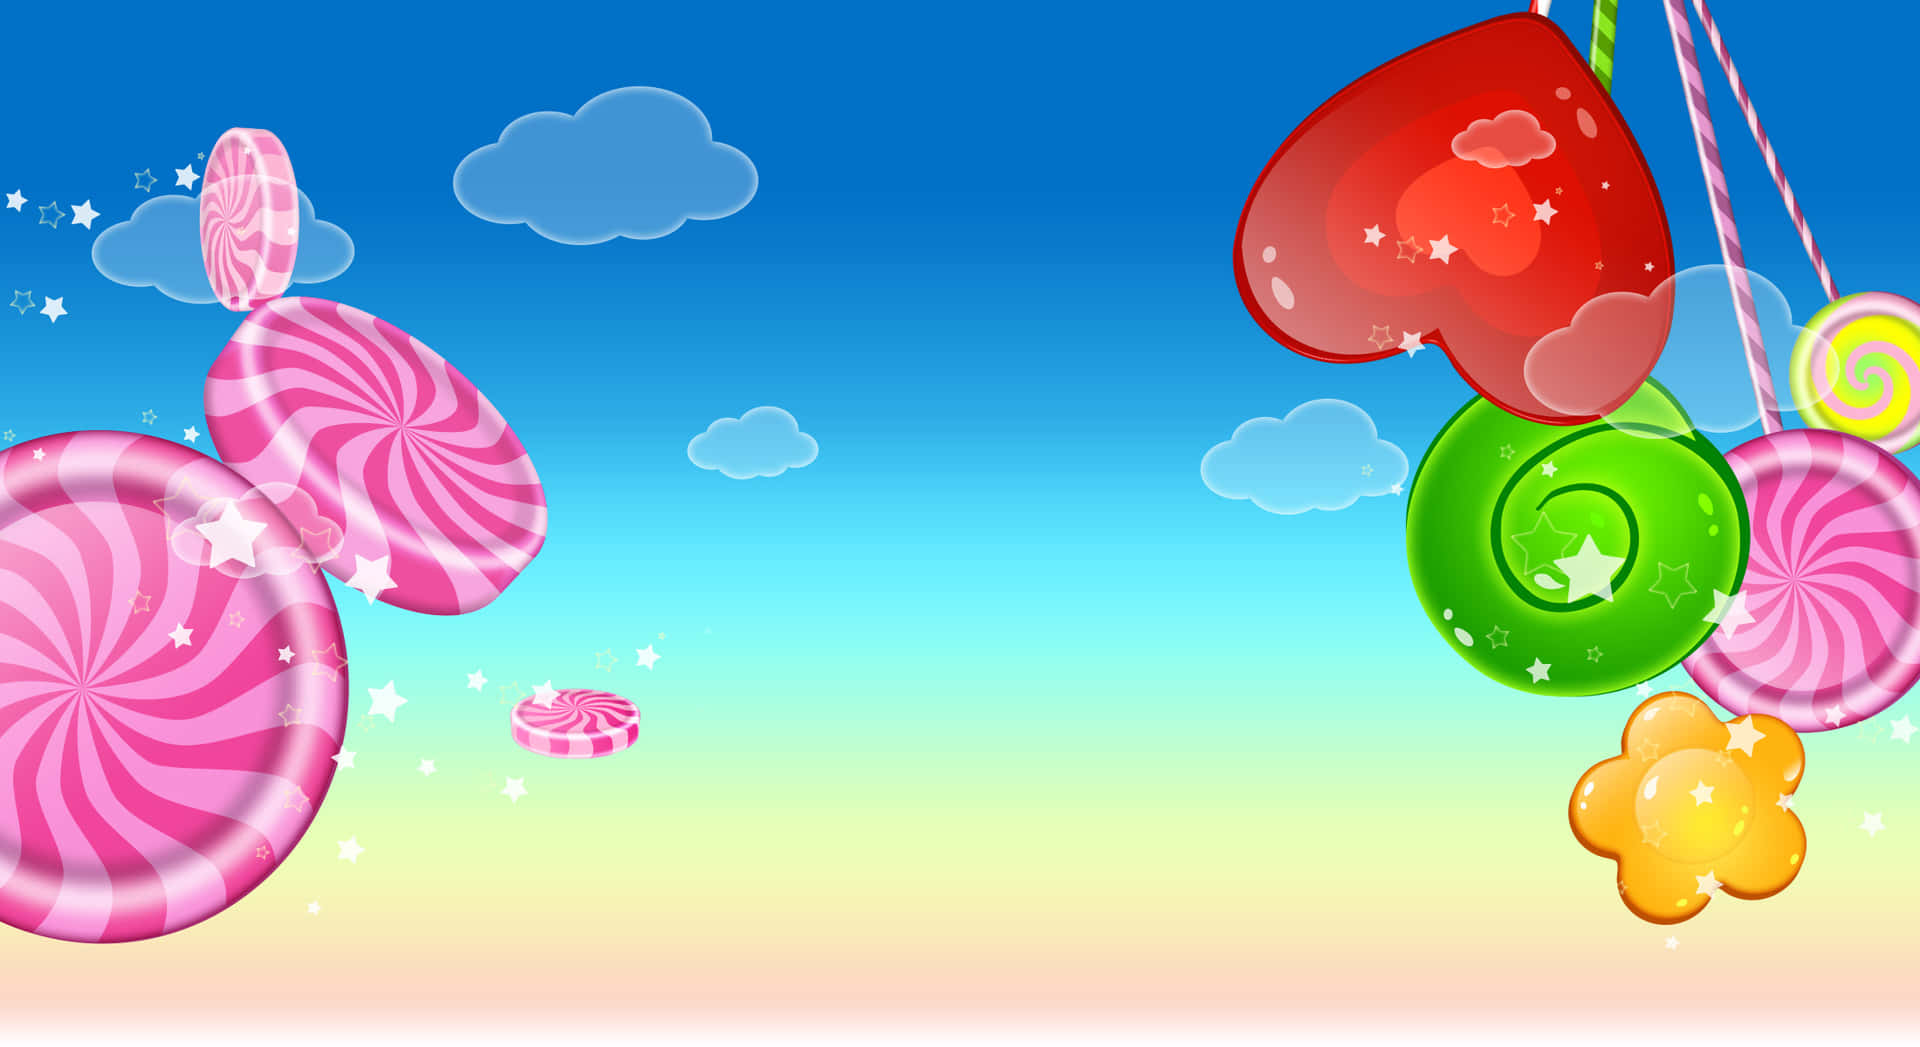 A Colorful Background With Candy Canes And Clouds Wallpaper